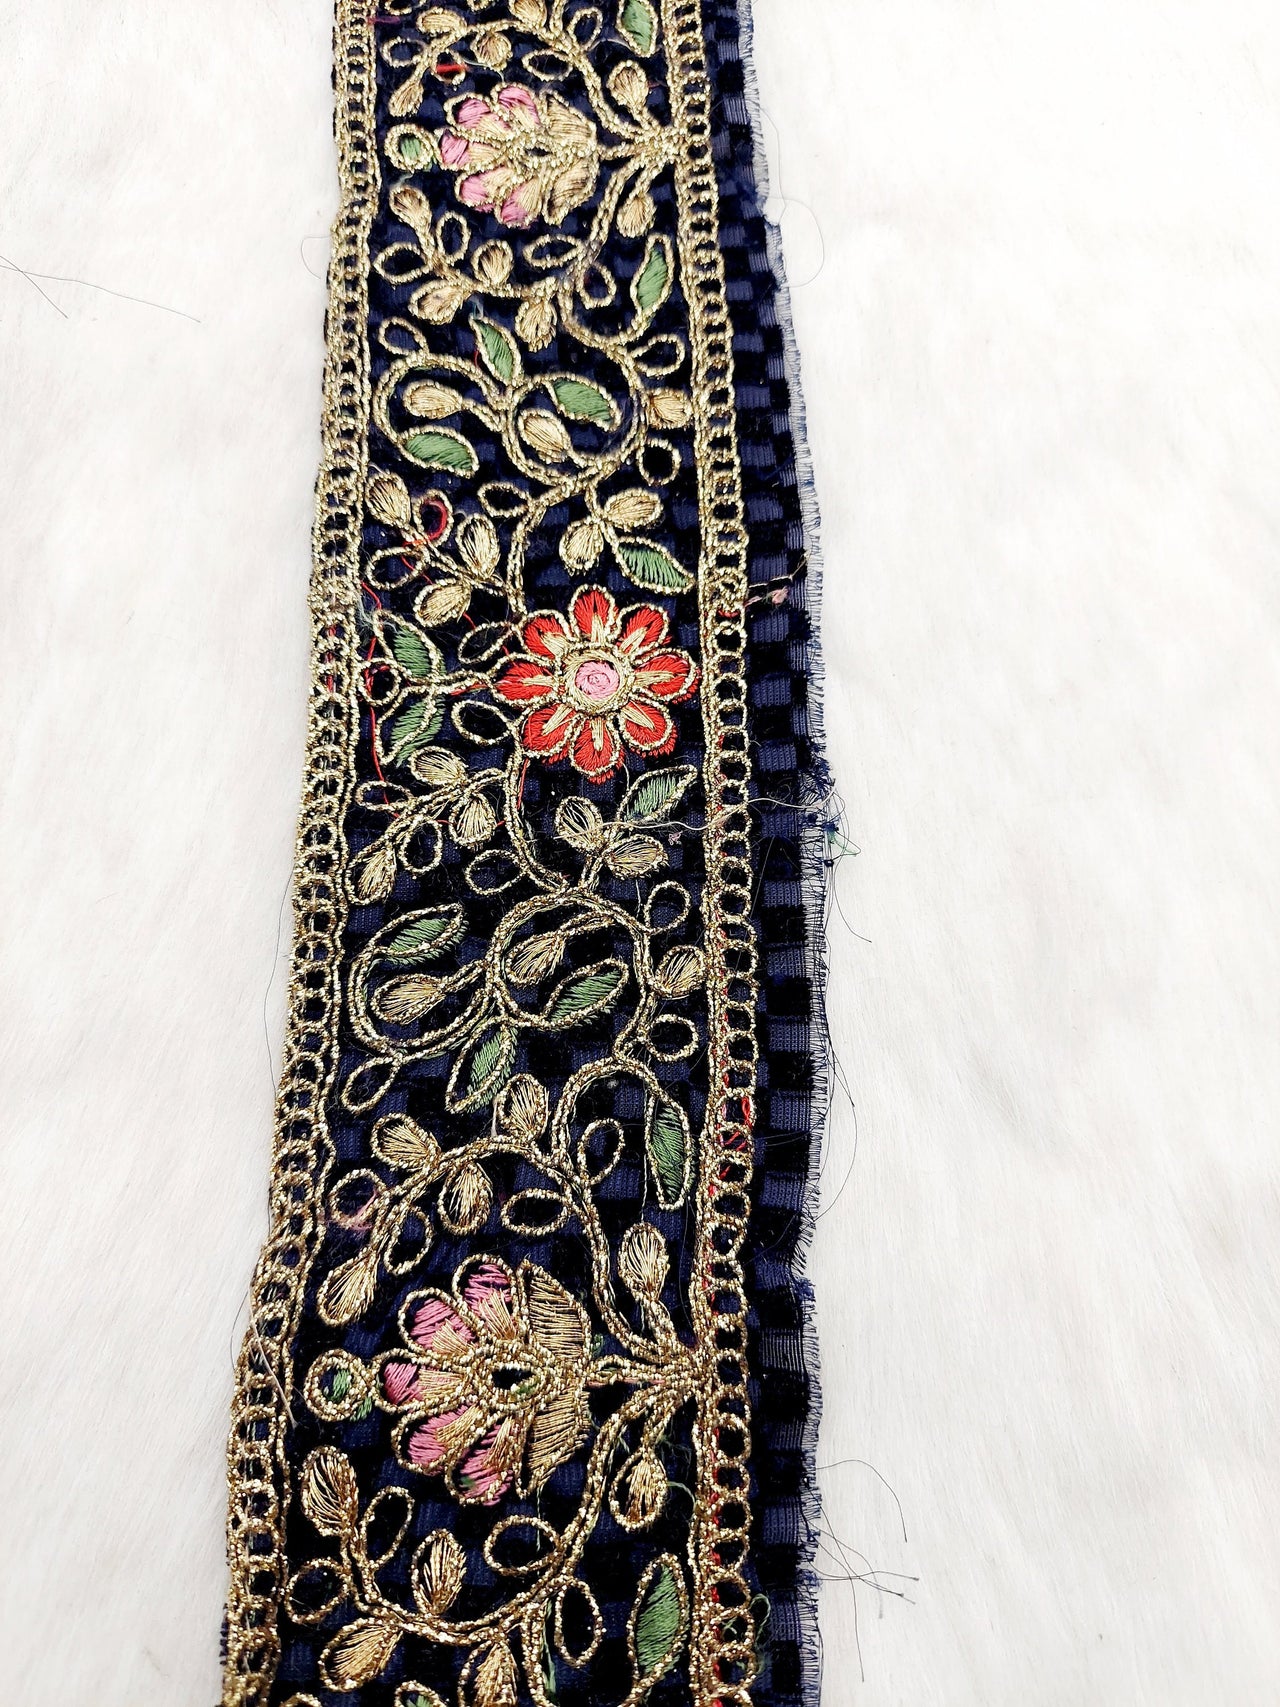 Navy Blue Chequered Velvet Trim In Gold Floral Embroidery, Gota Patti Edging Trim, Trim By Yard Decorative Trimming, Embroidered Trim